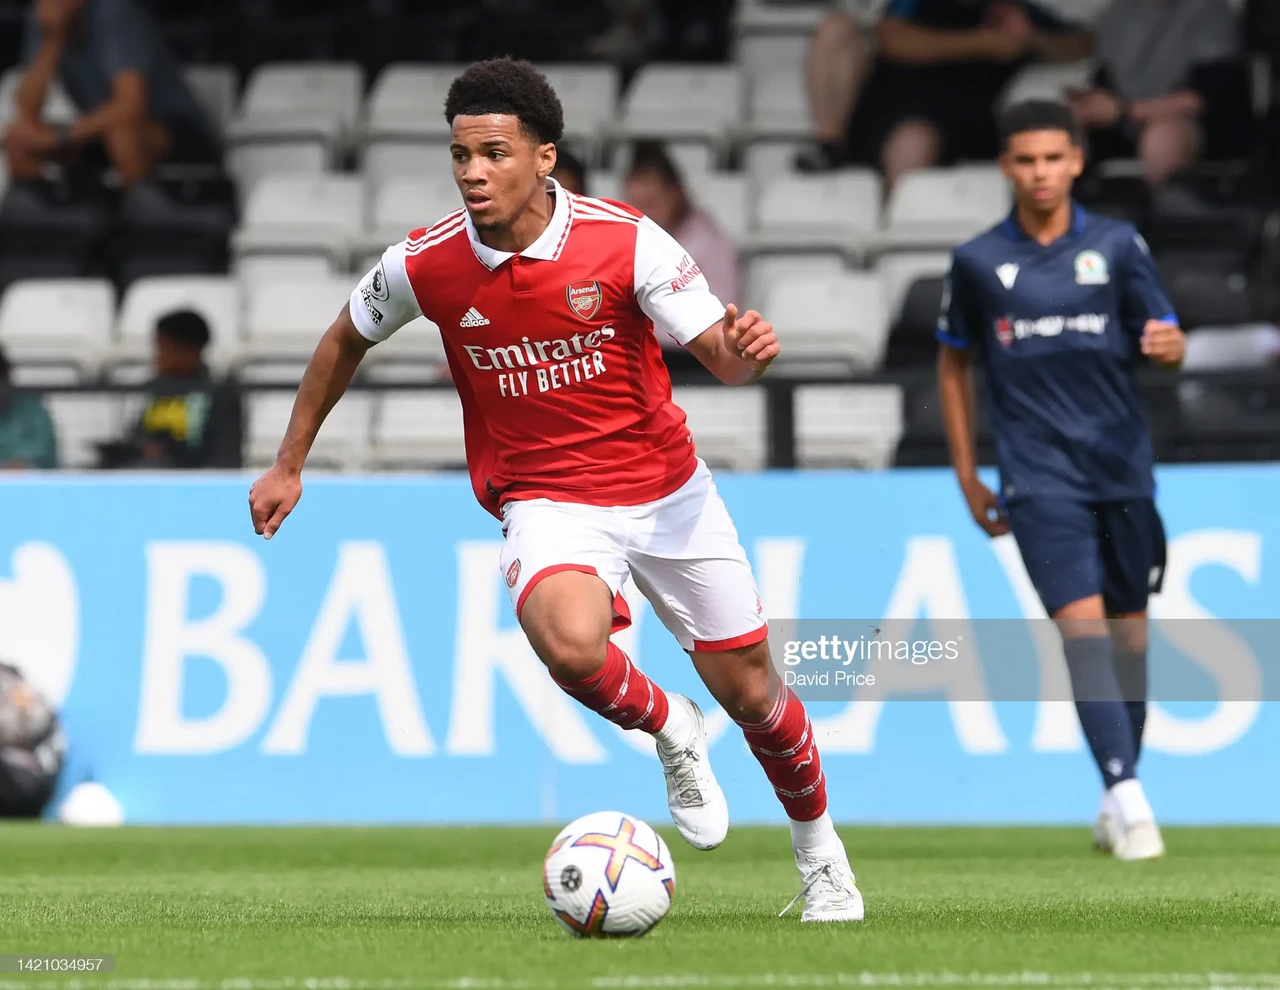 Arsenal Academy coach- My biggest worry is if we can keep these youngsters